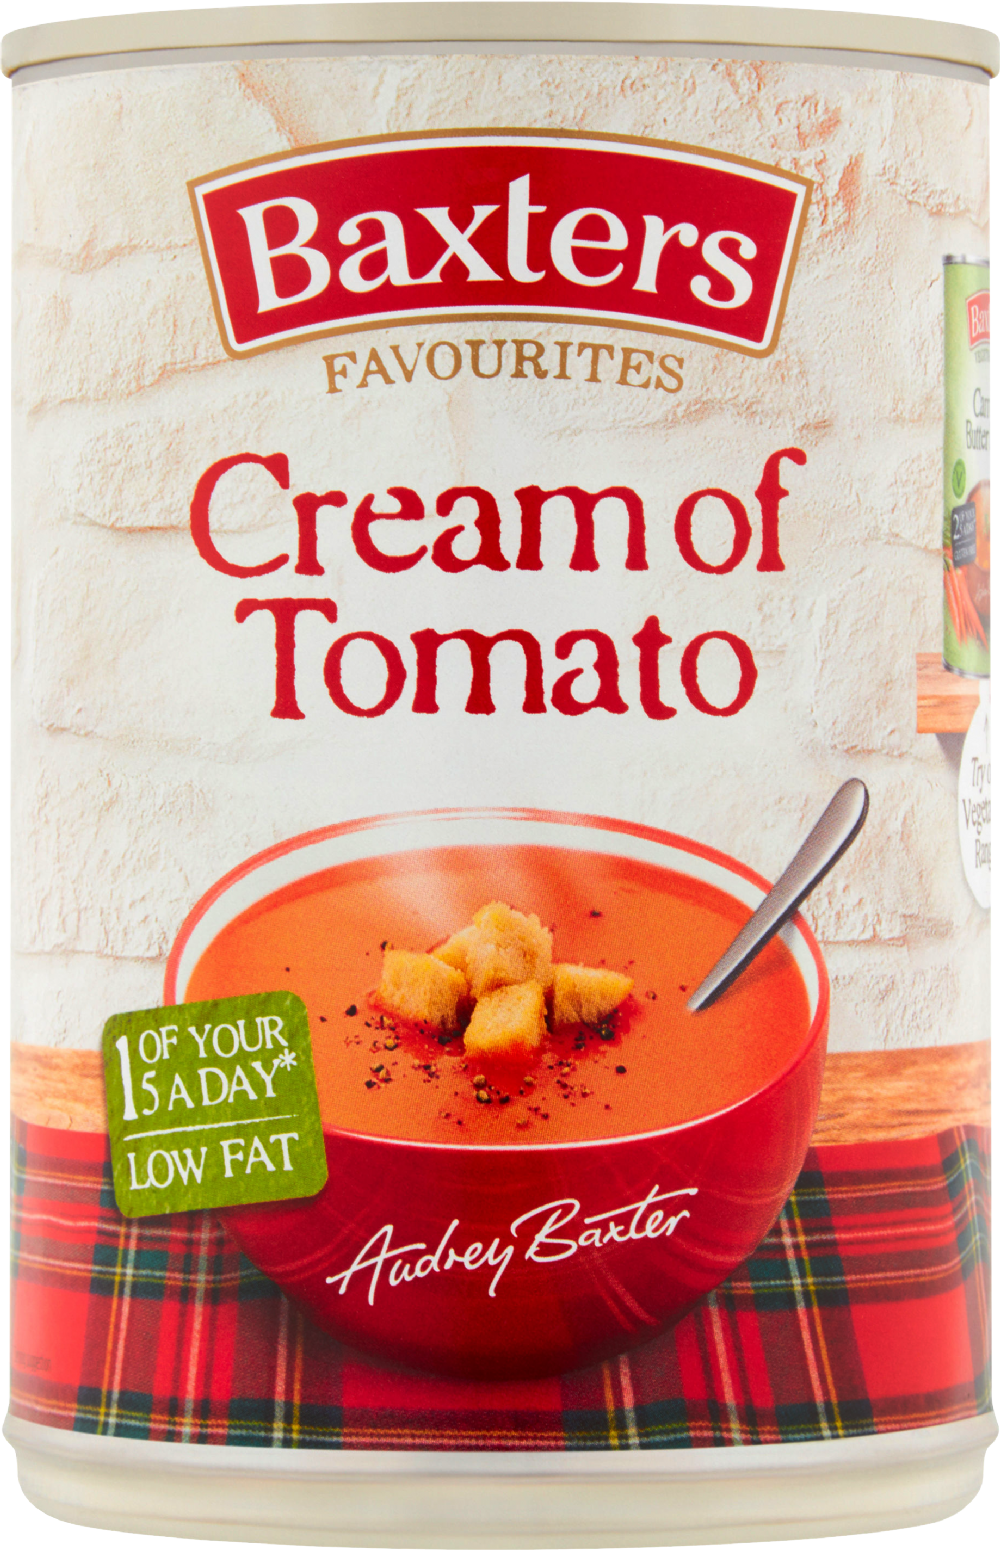 BAXTERS Favourites Cream of Tomato Soup 400g